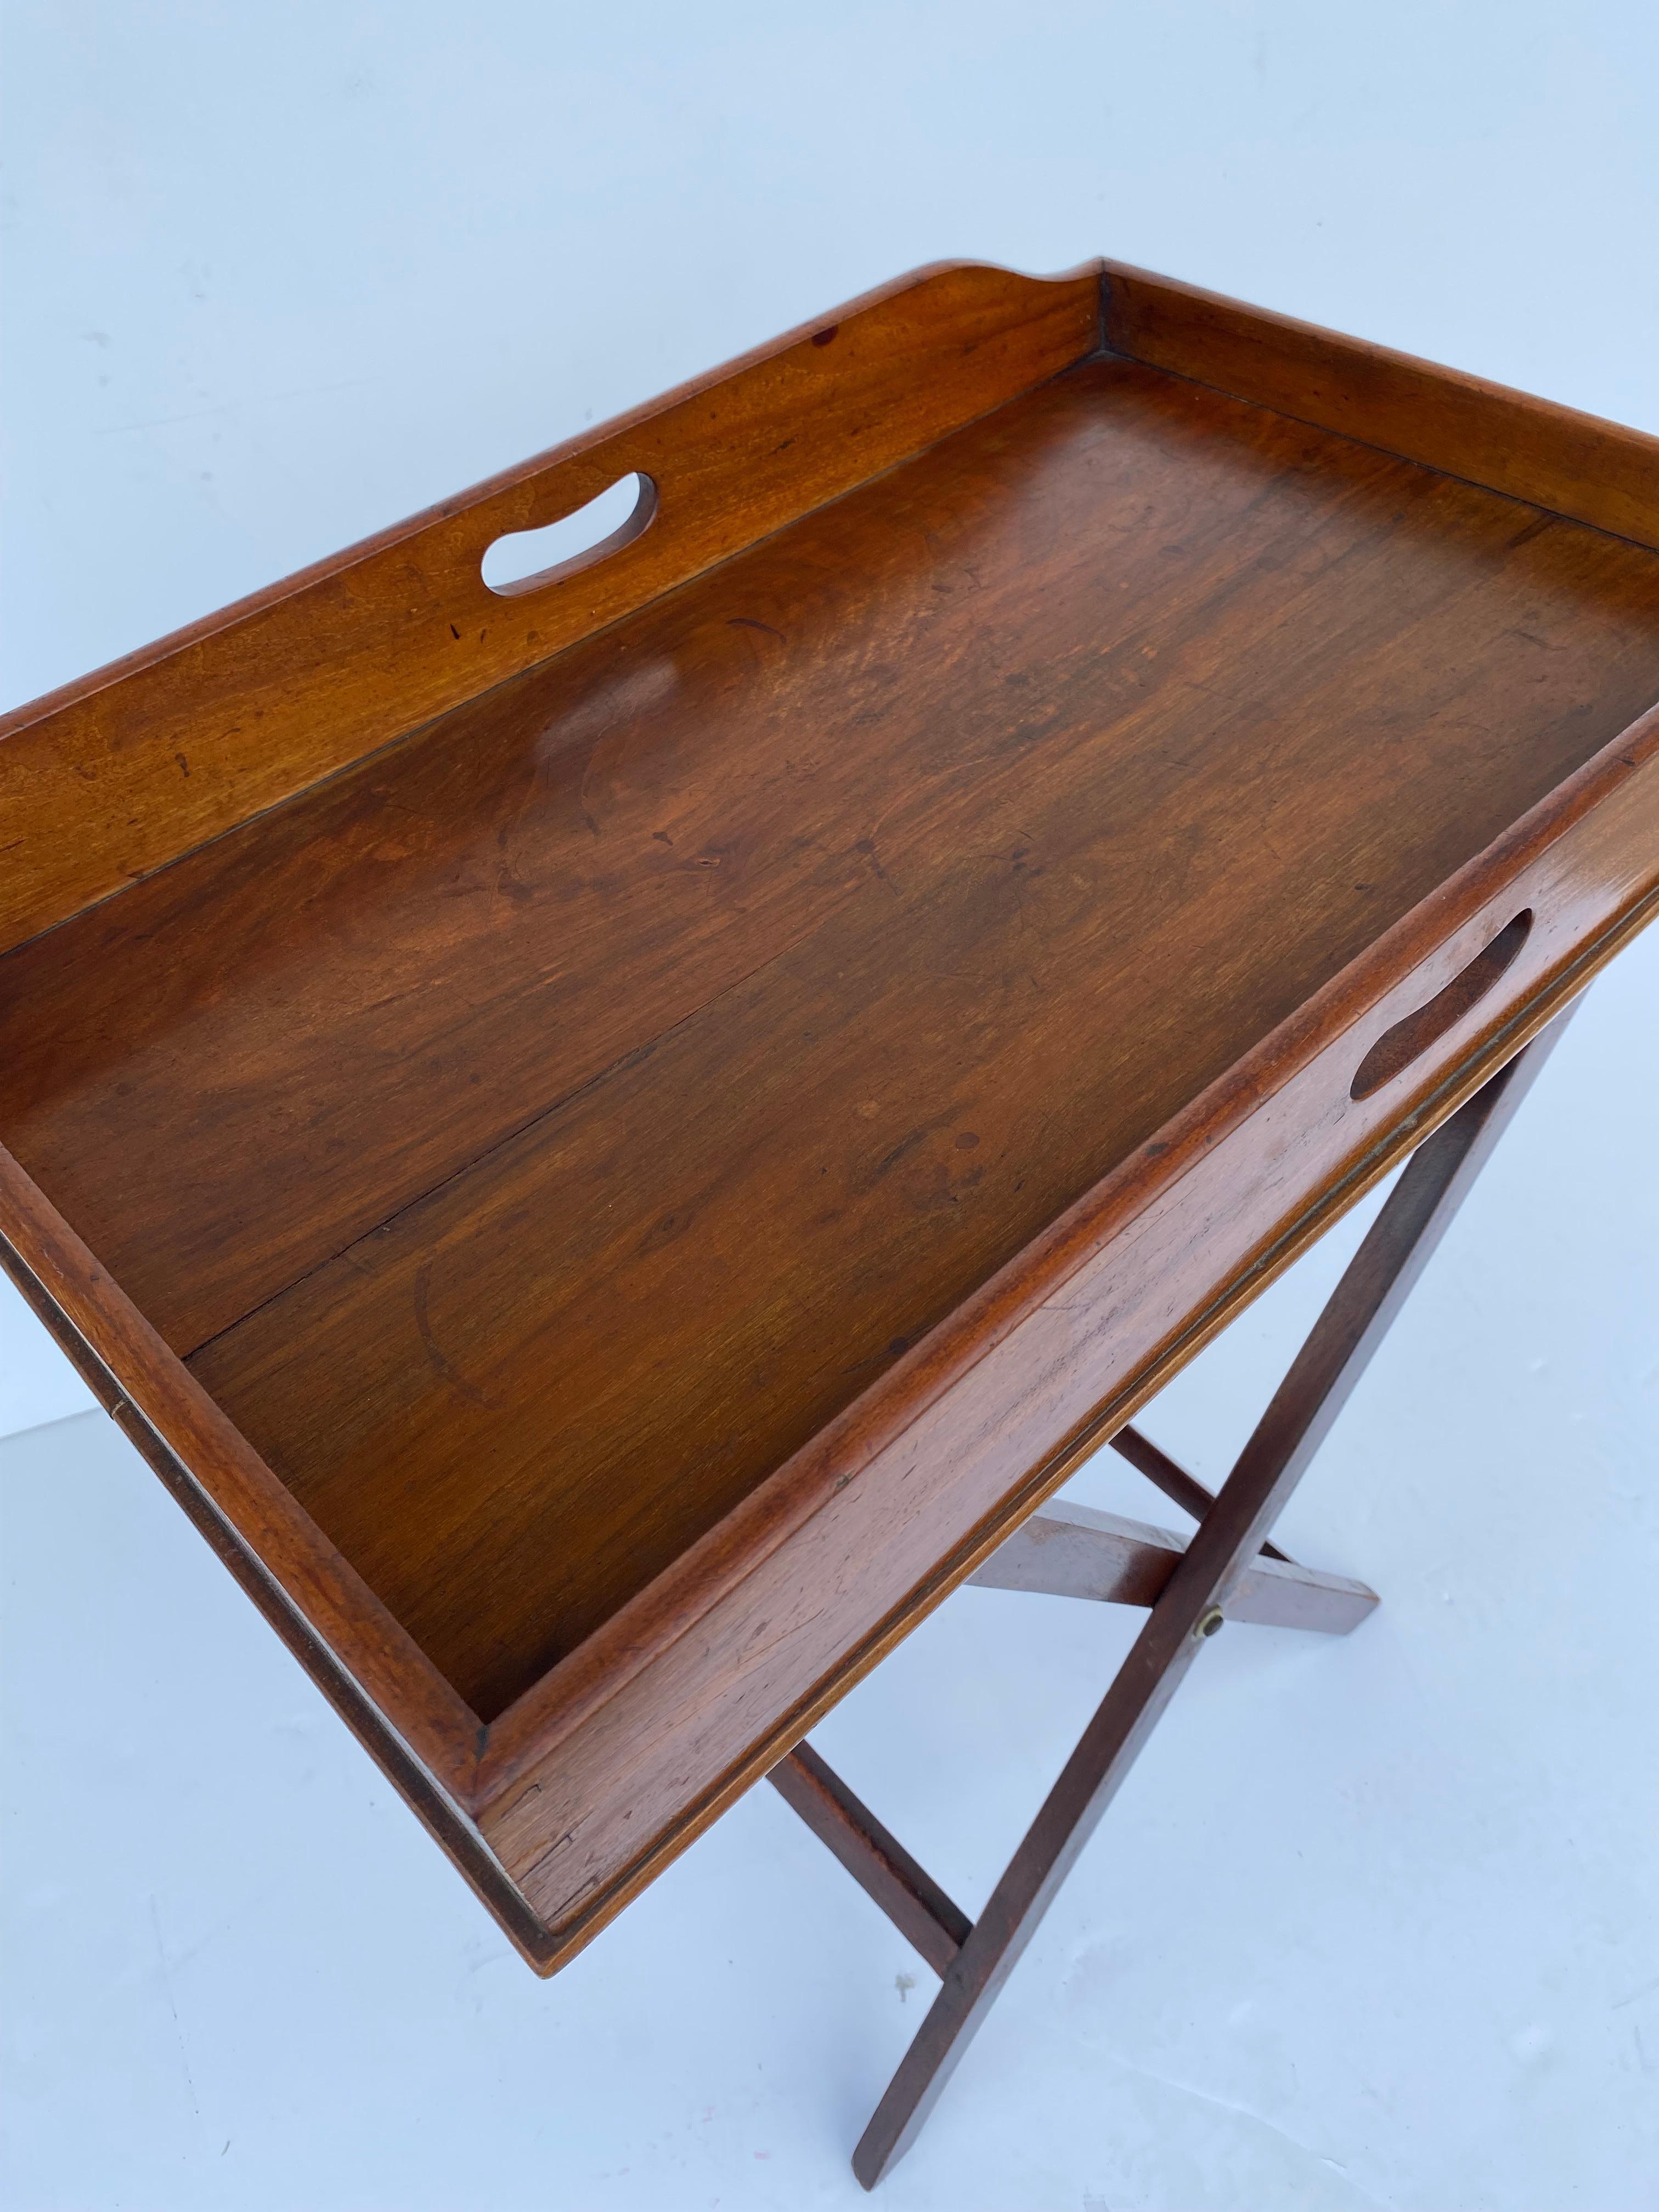 A mid-19th century English mahogany butlers tray on the stand features a rectangular tray with a surrounding gallery. On a folding X-frame stand with woven straps to accommodate the tray.